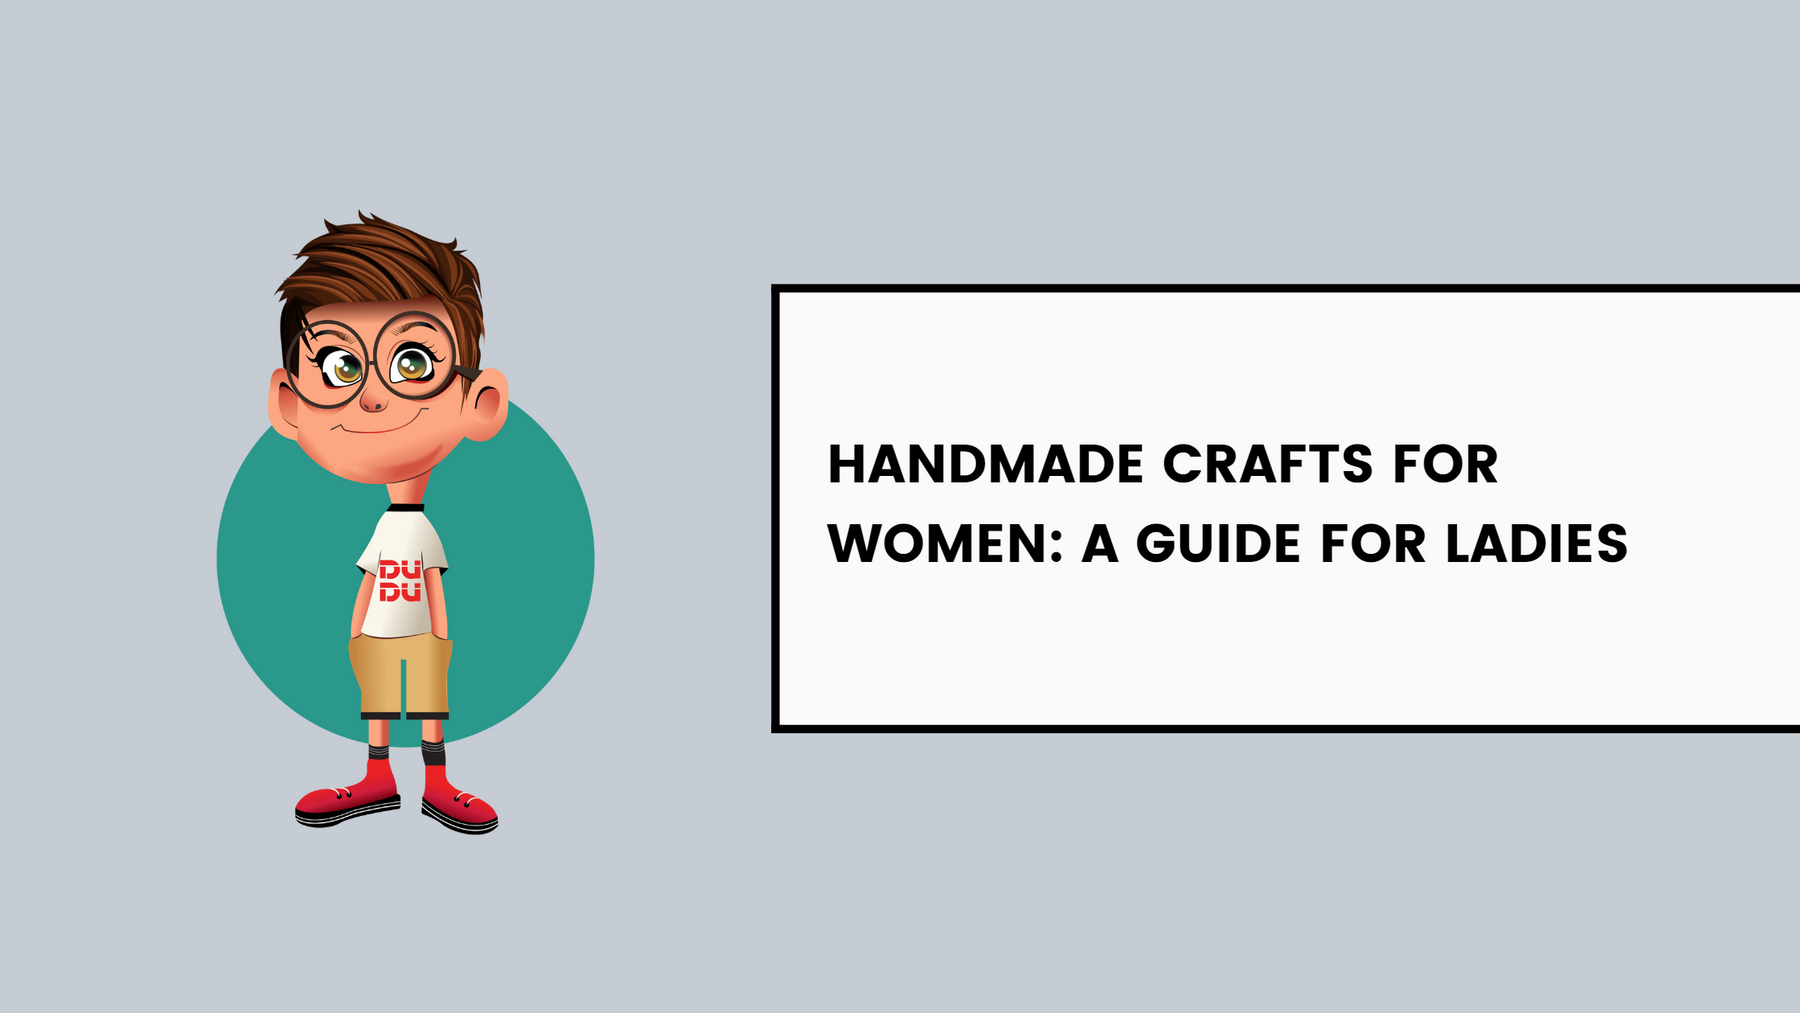 Handmade Crafts For Women: A Guide For Ladies